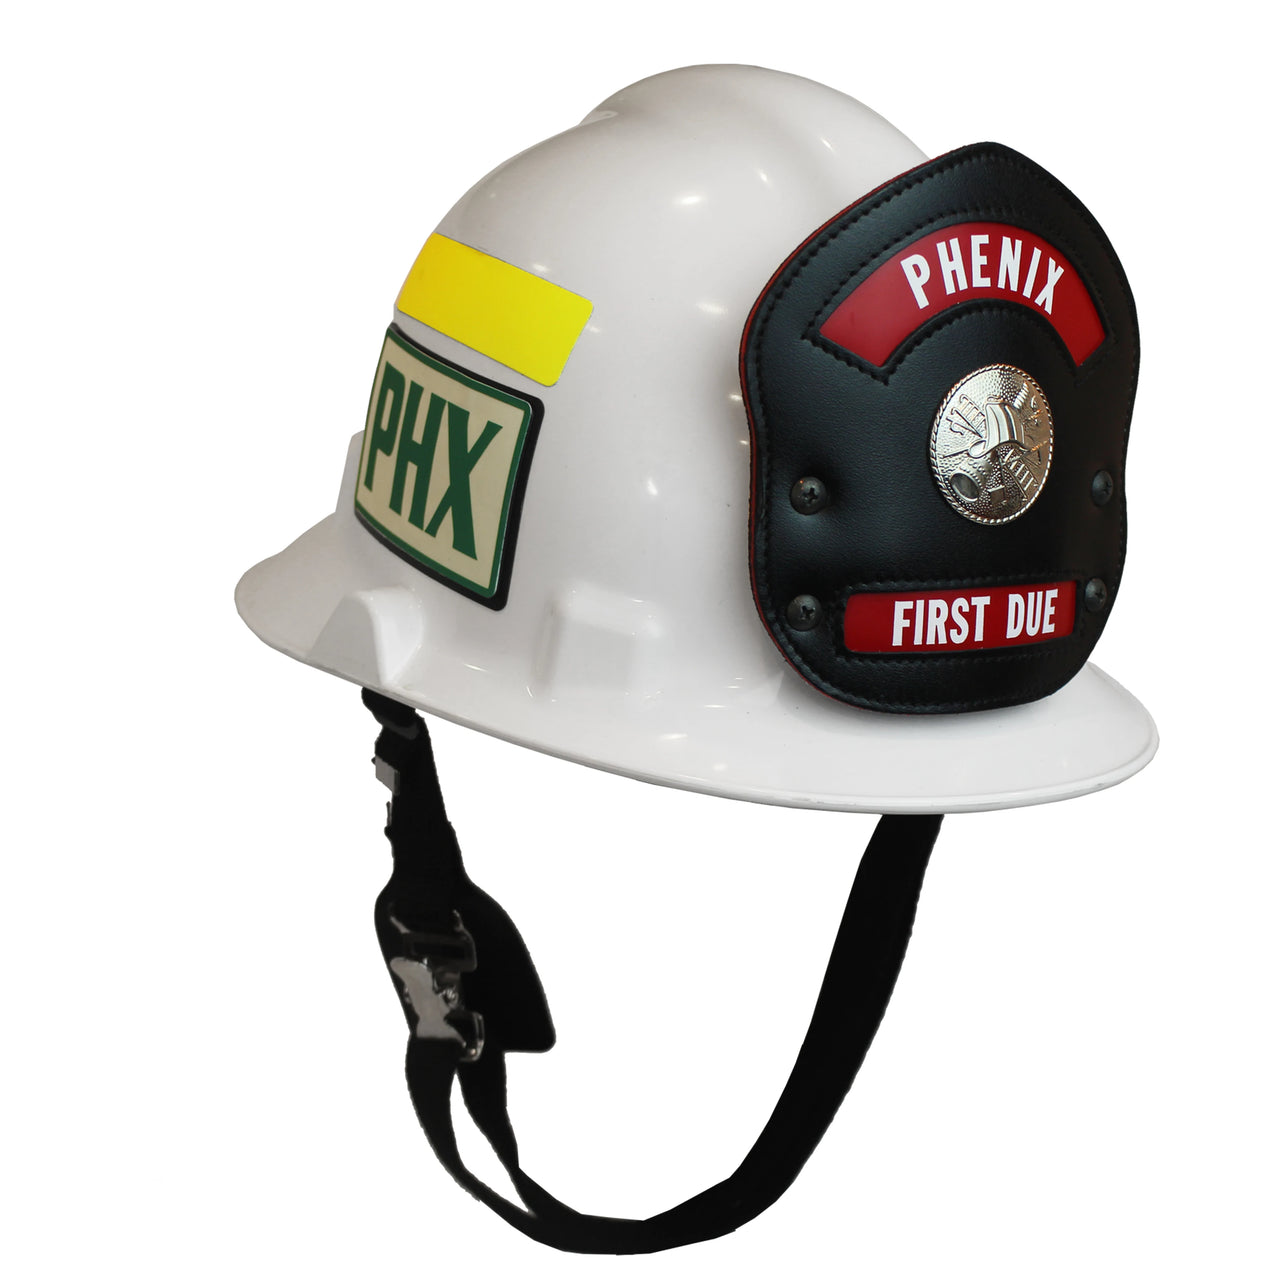 Phenix First Due Helmet Parts: Please note the items with "Phe" are specific to the First Due Helmets.